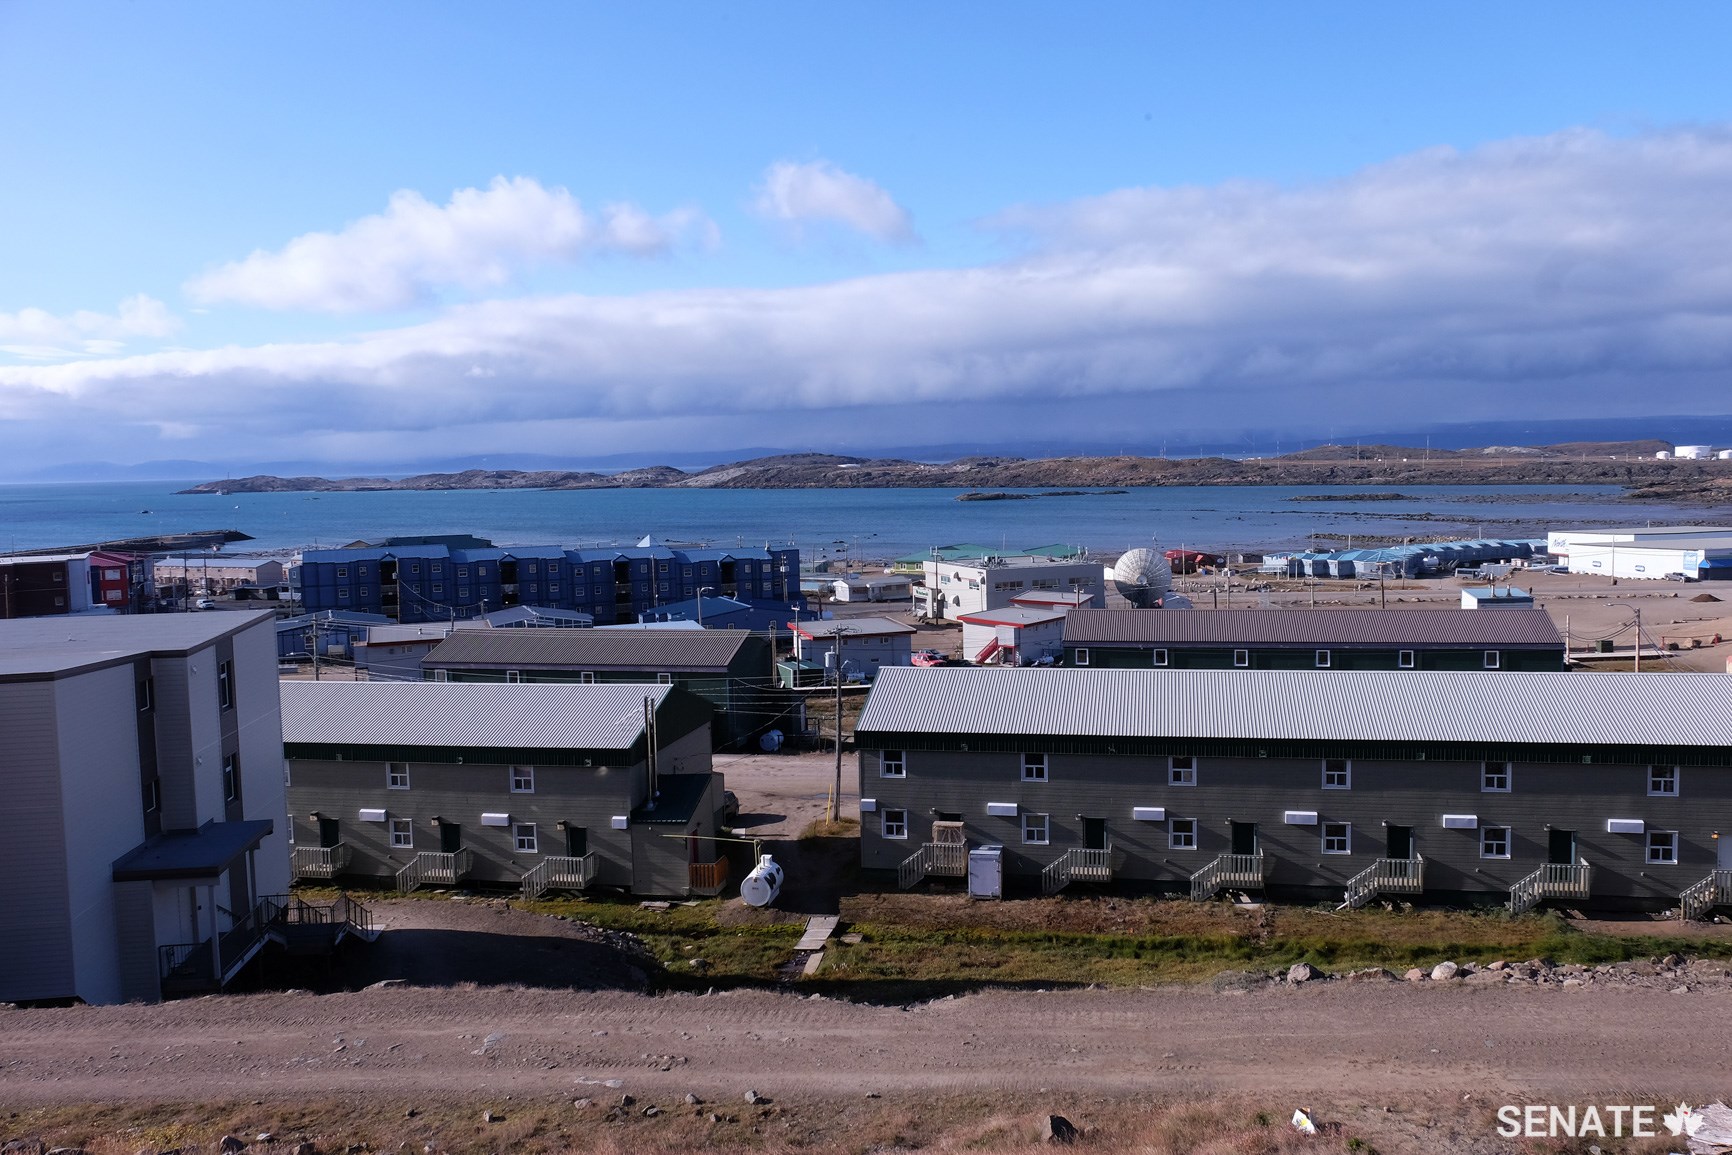 Homes overlook the Koojesse Inlet in Iqaluit, Nunavut. Only 62% of communities in the territory have suitable housing. The cost of building a home and other infrastructure projects in the north can be 150% higher compared to those in the south due to the short shipping and construction season, harsh climate and other factors.